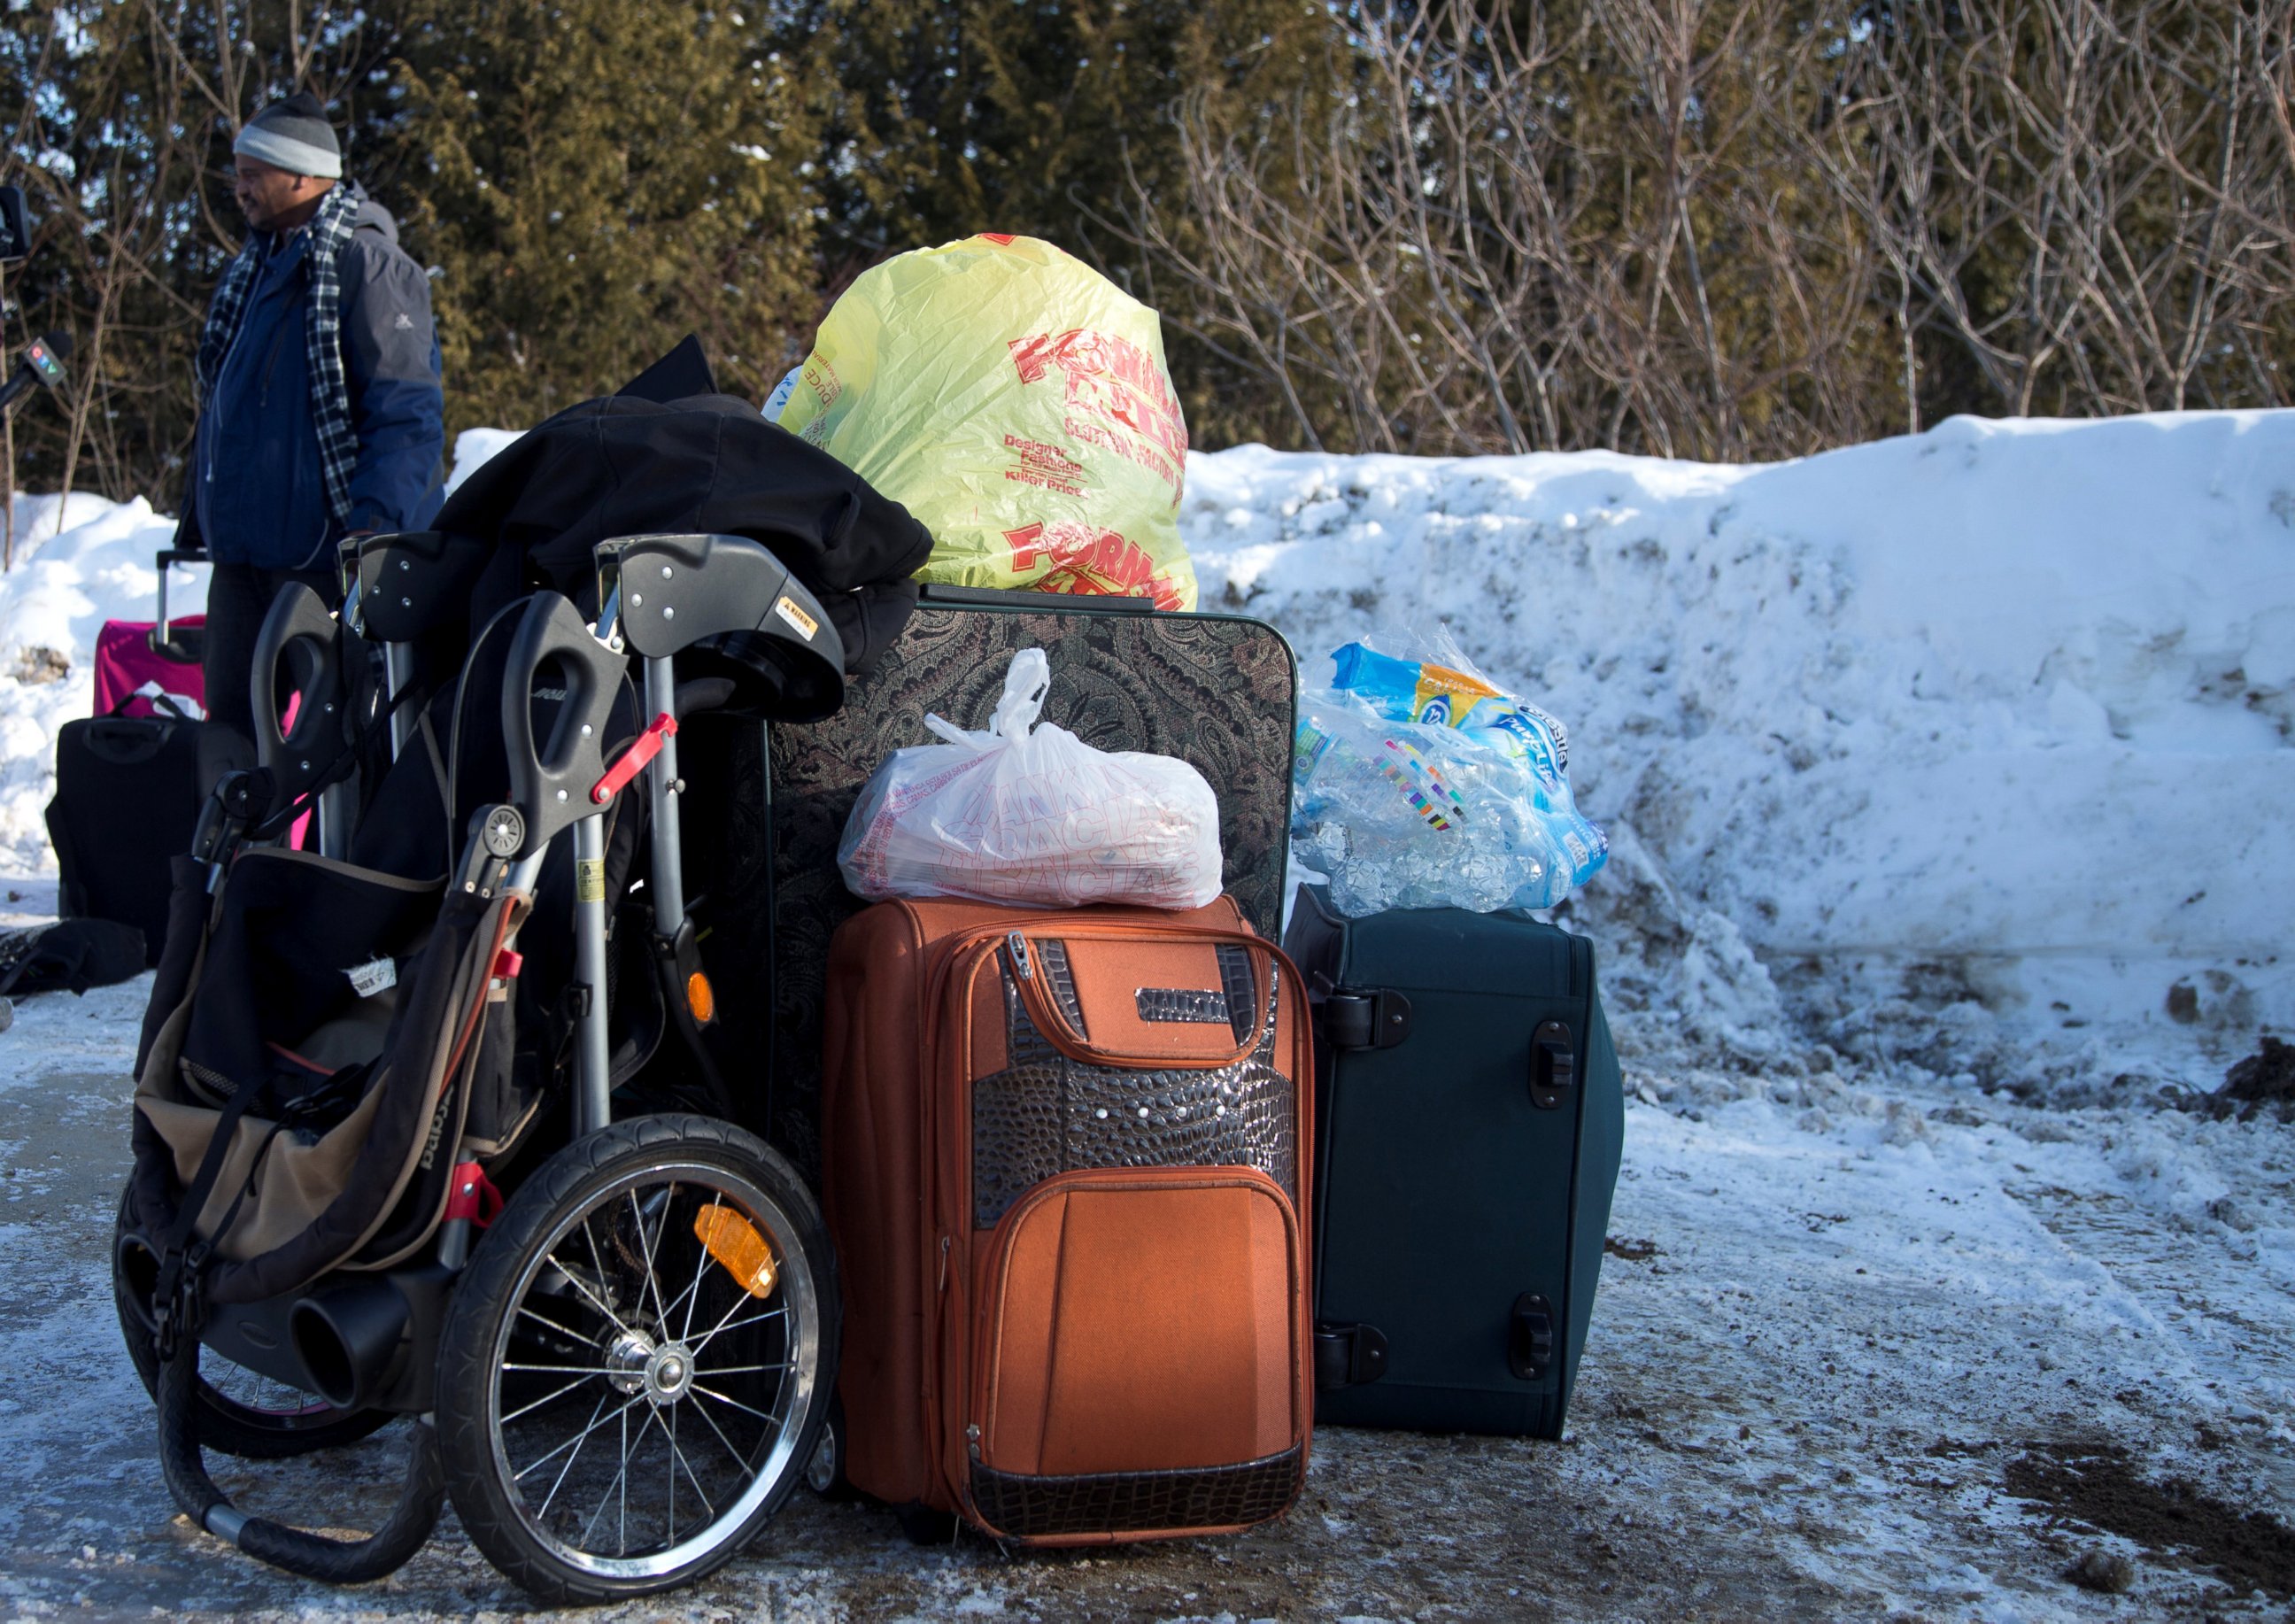 PHOTO: A man claiming to be from Sudan is detained with his family's luggage by a U.S. border patrol officer after his family crossed the U.S.-Canada border into Hemmingford, Canada, from Champlain in New York, Feb. 17, 2017.